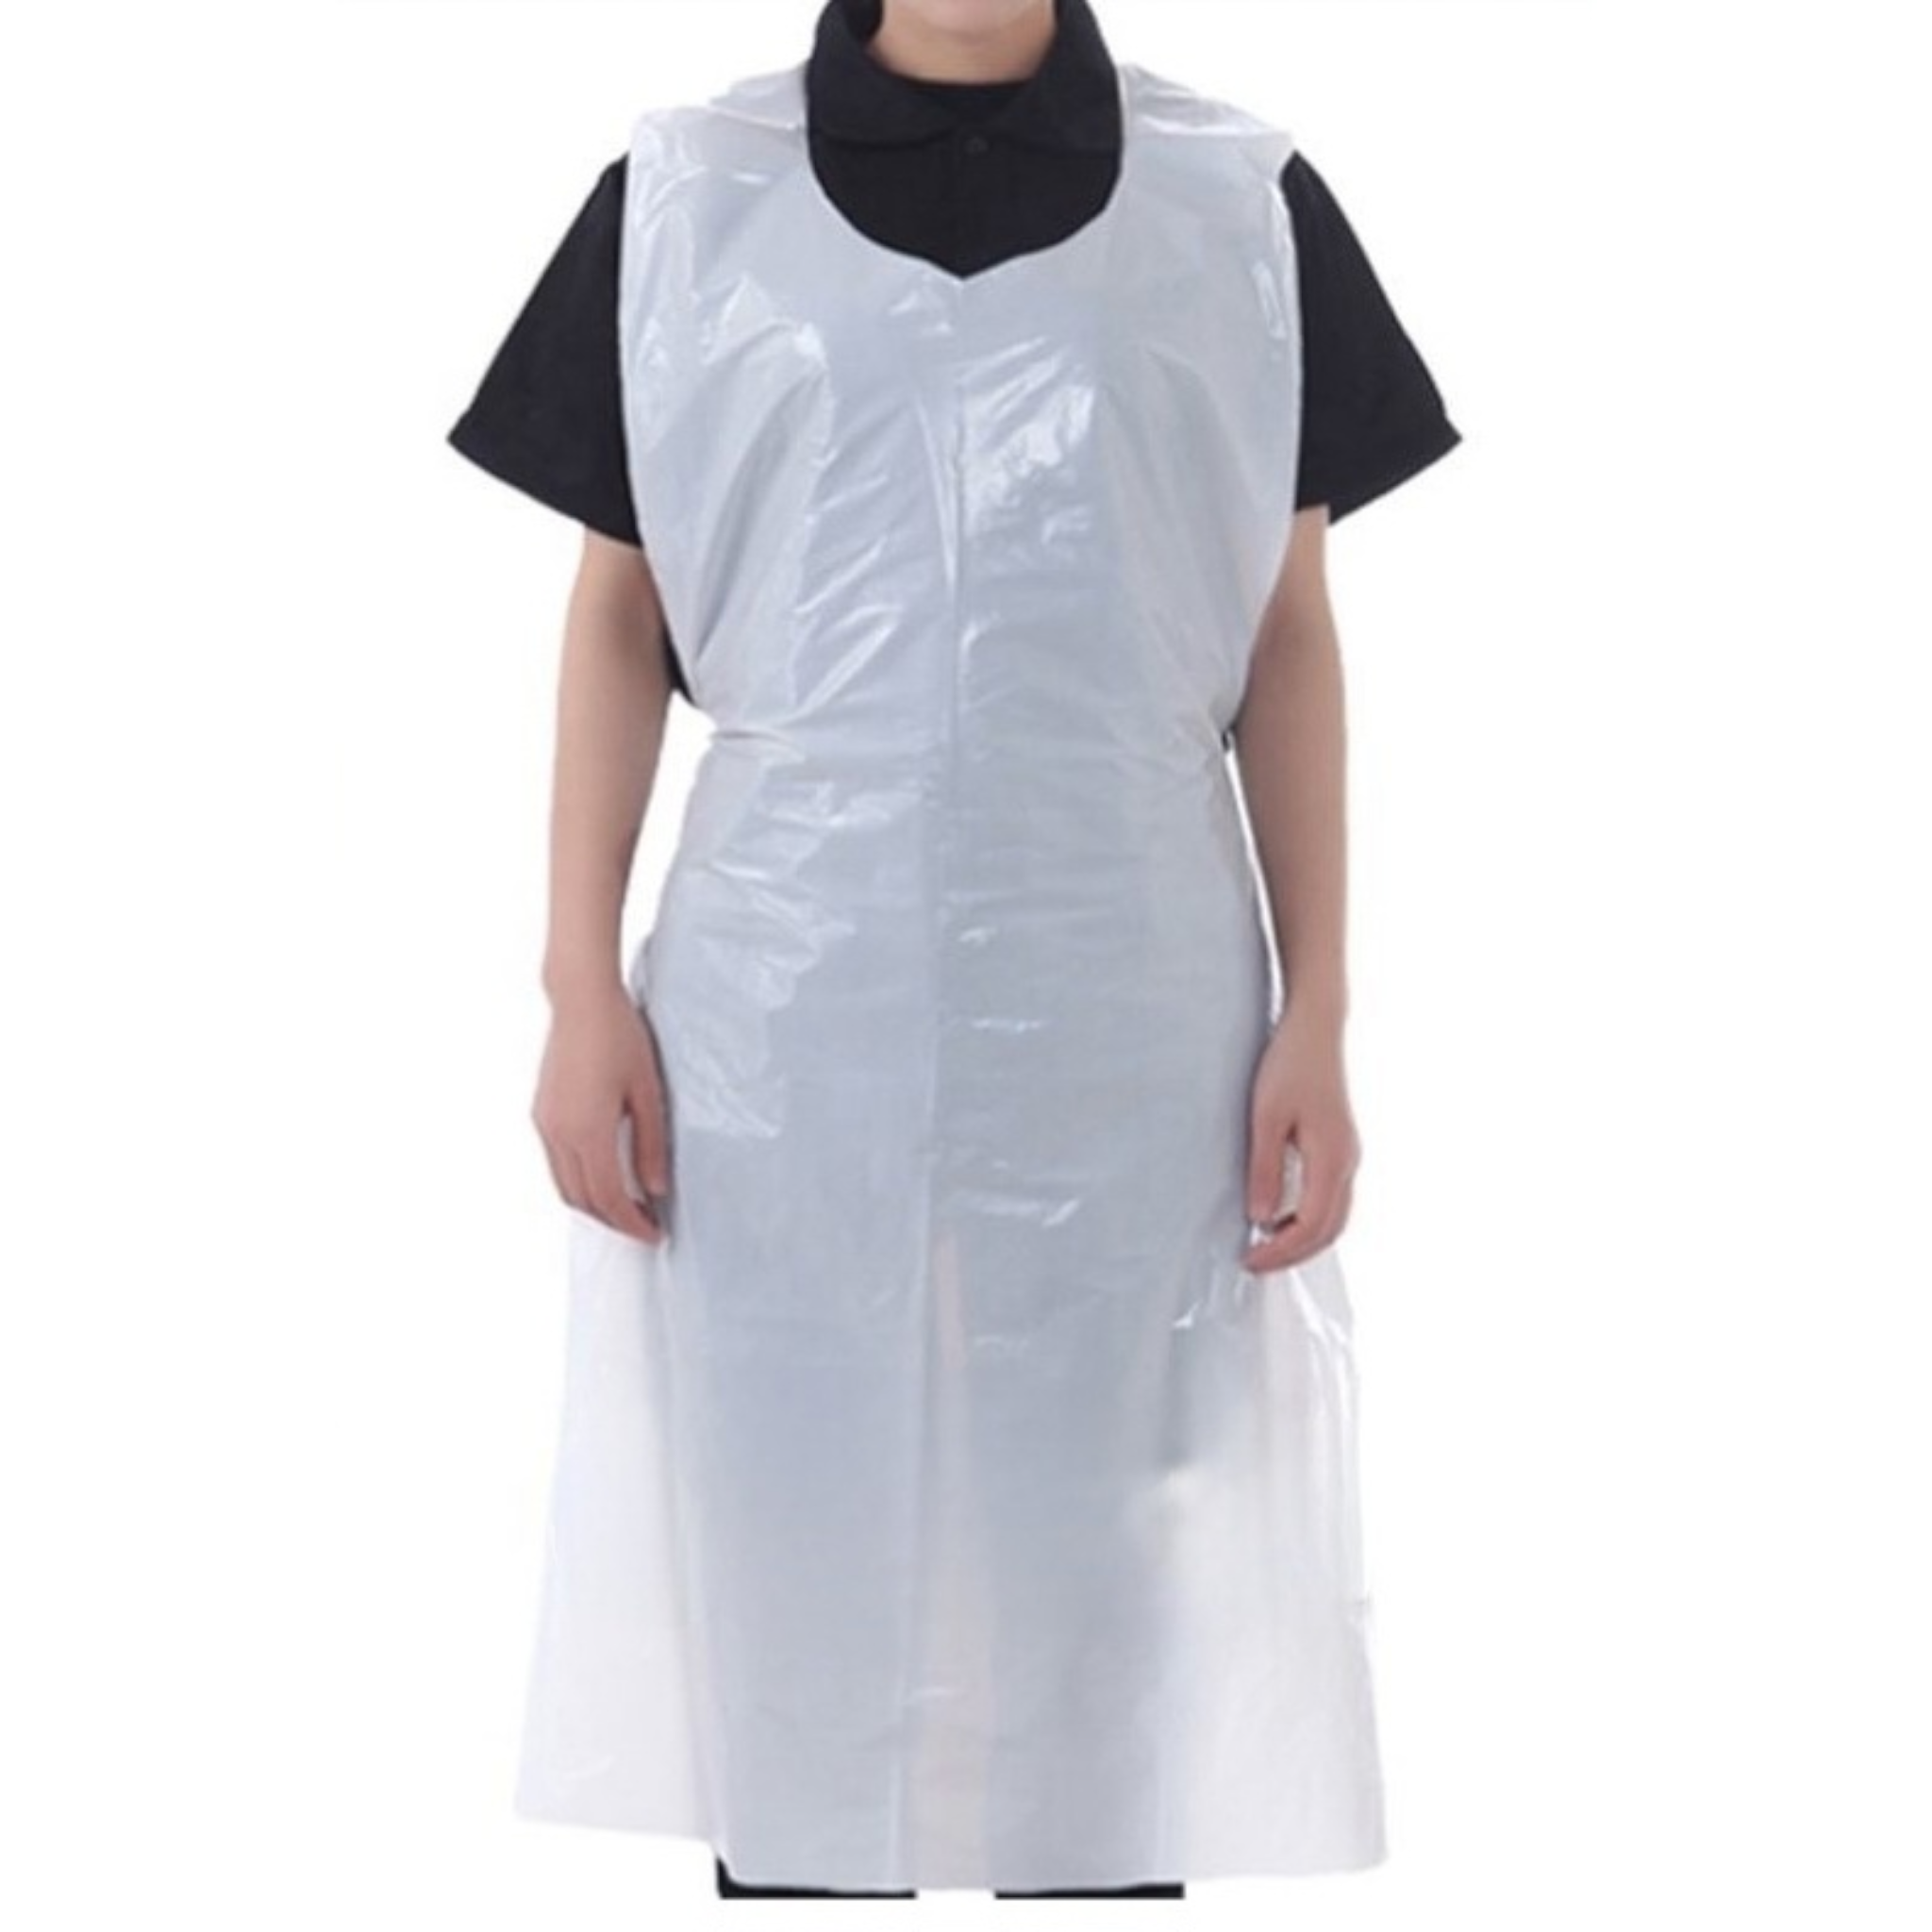 Apron Disposable Plastic White 660x985+25mmx20mic 25pack